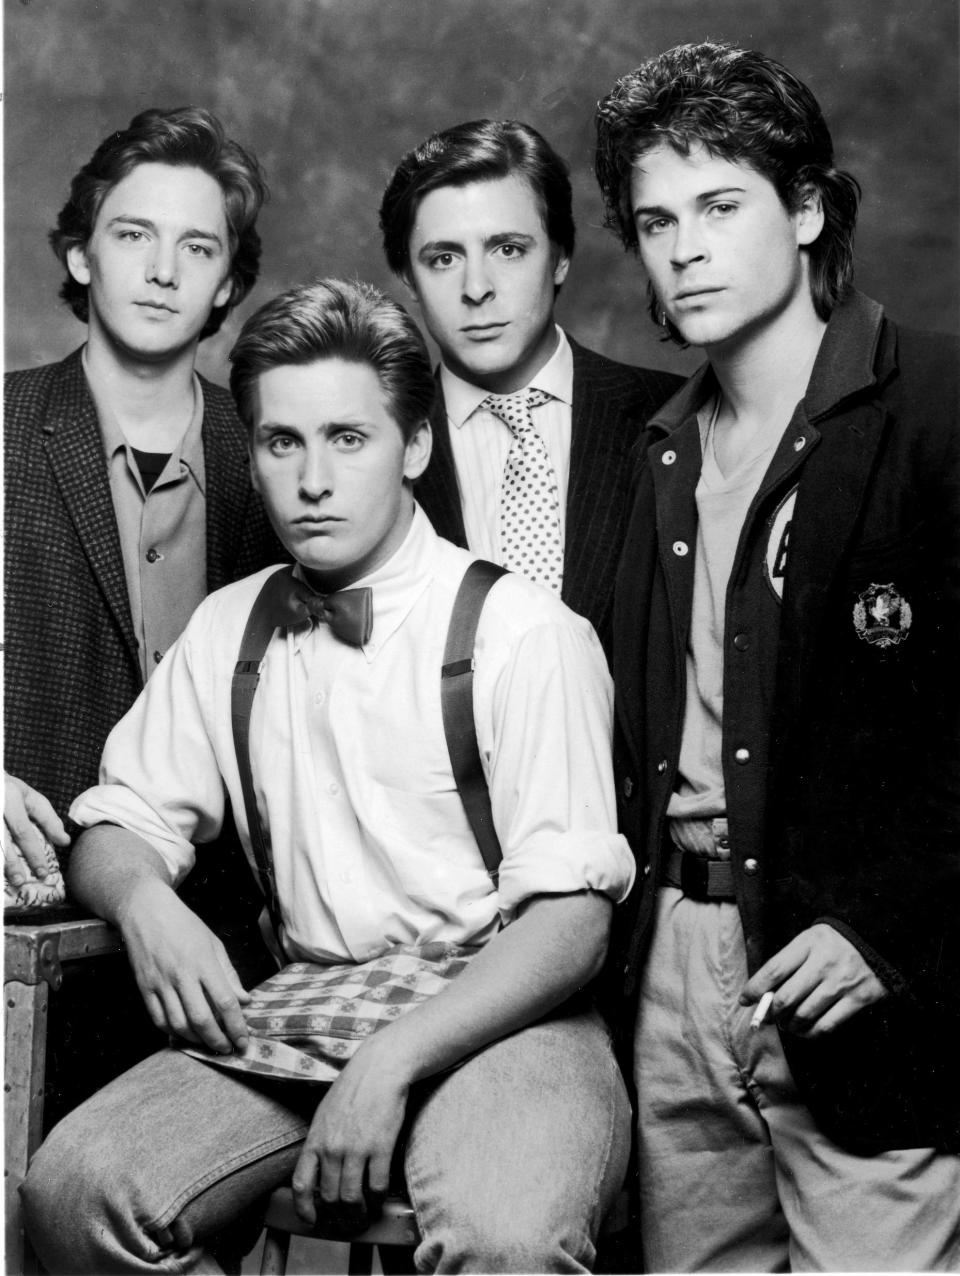 Andrew McCarthy, Emilio Estevez, Judd Nelson and Rob Lowe as they appeared in the 1985 movie "St. Elmo's Fire."